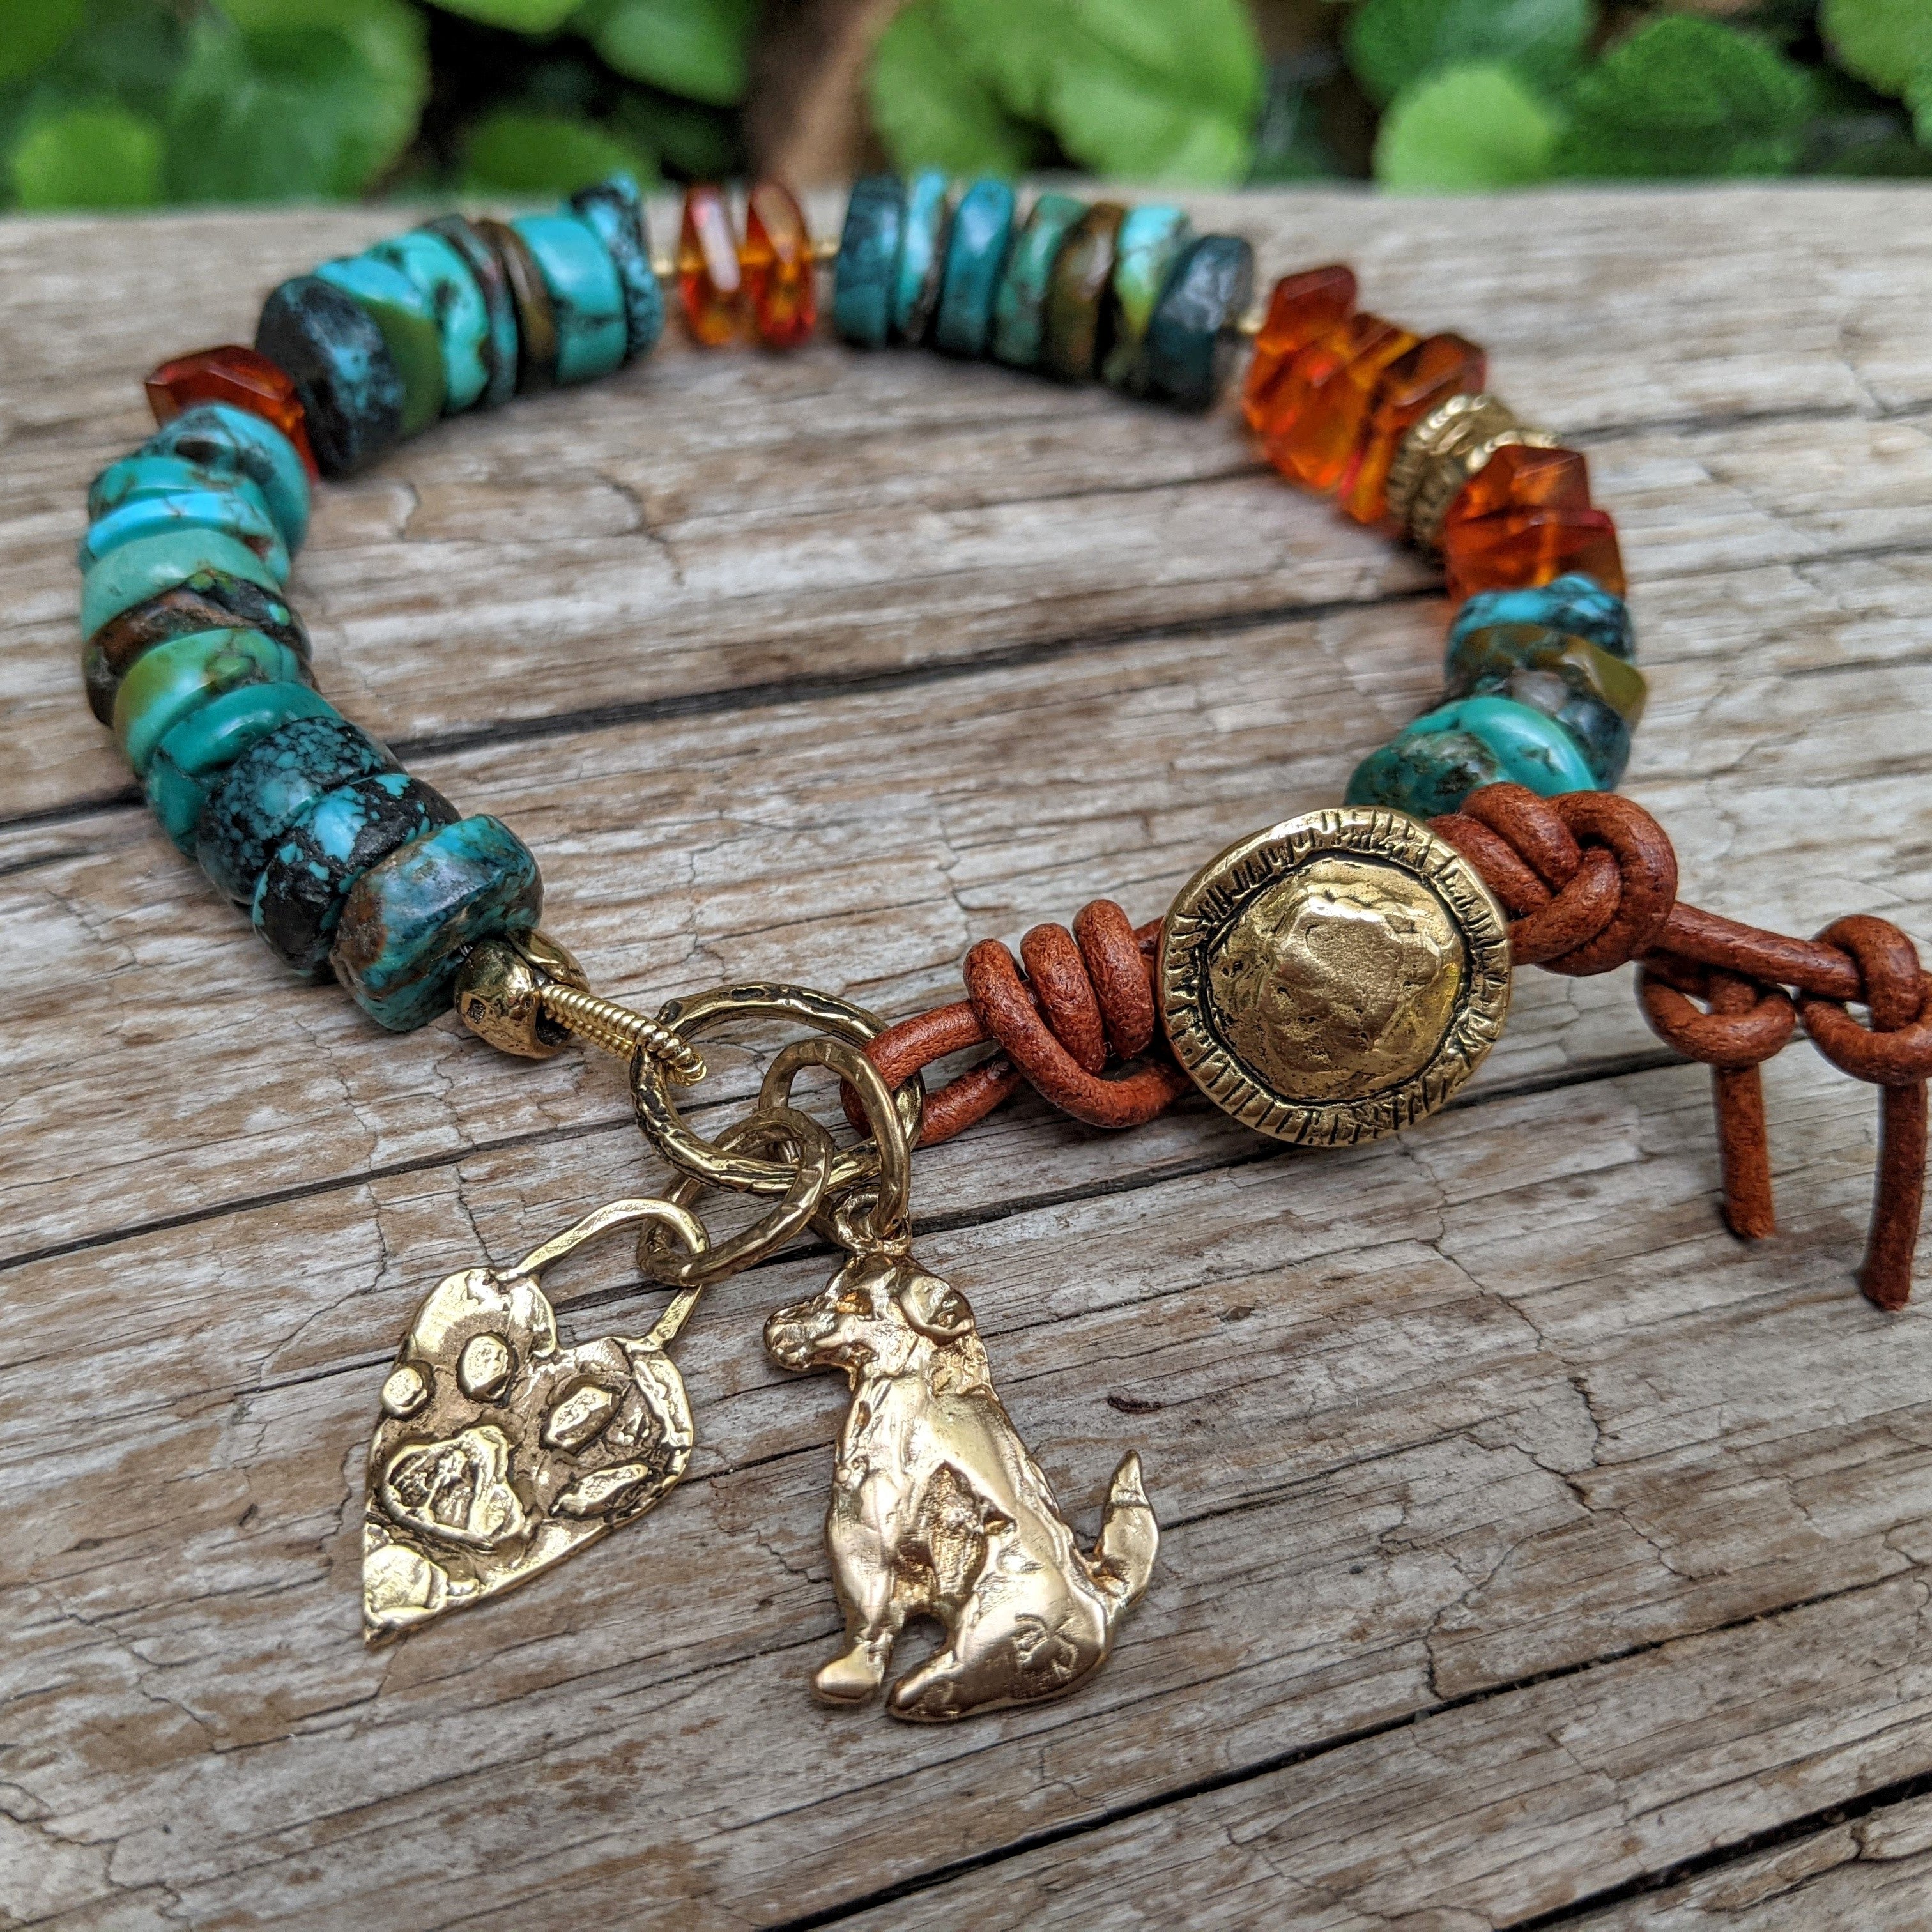 Rustic turquoise bracelet with Baltic amber and gold bronze charms dog and paw.